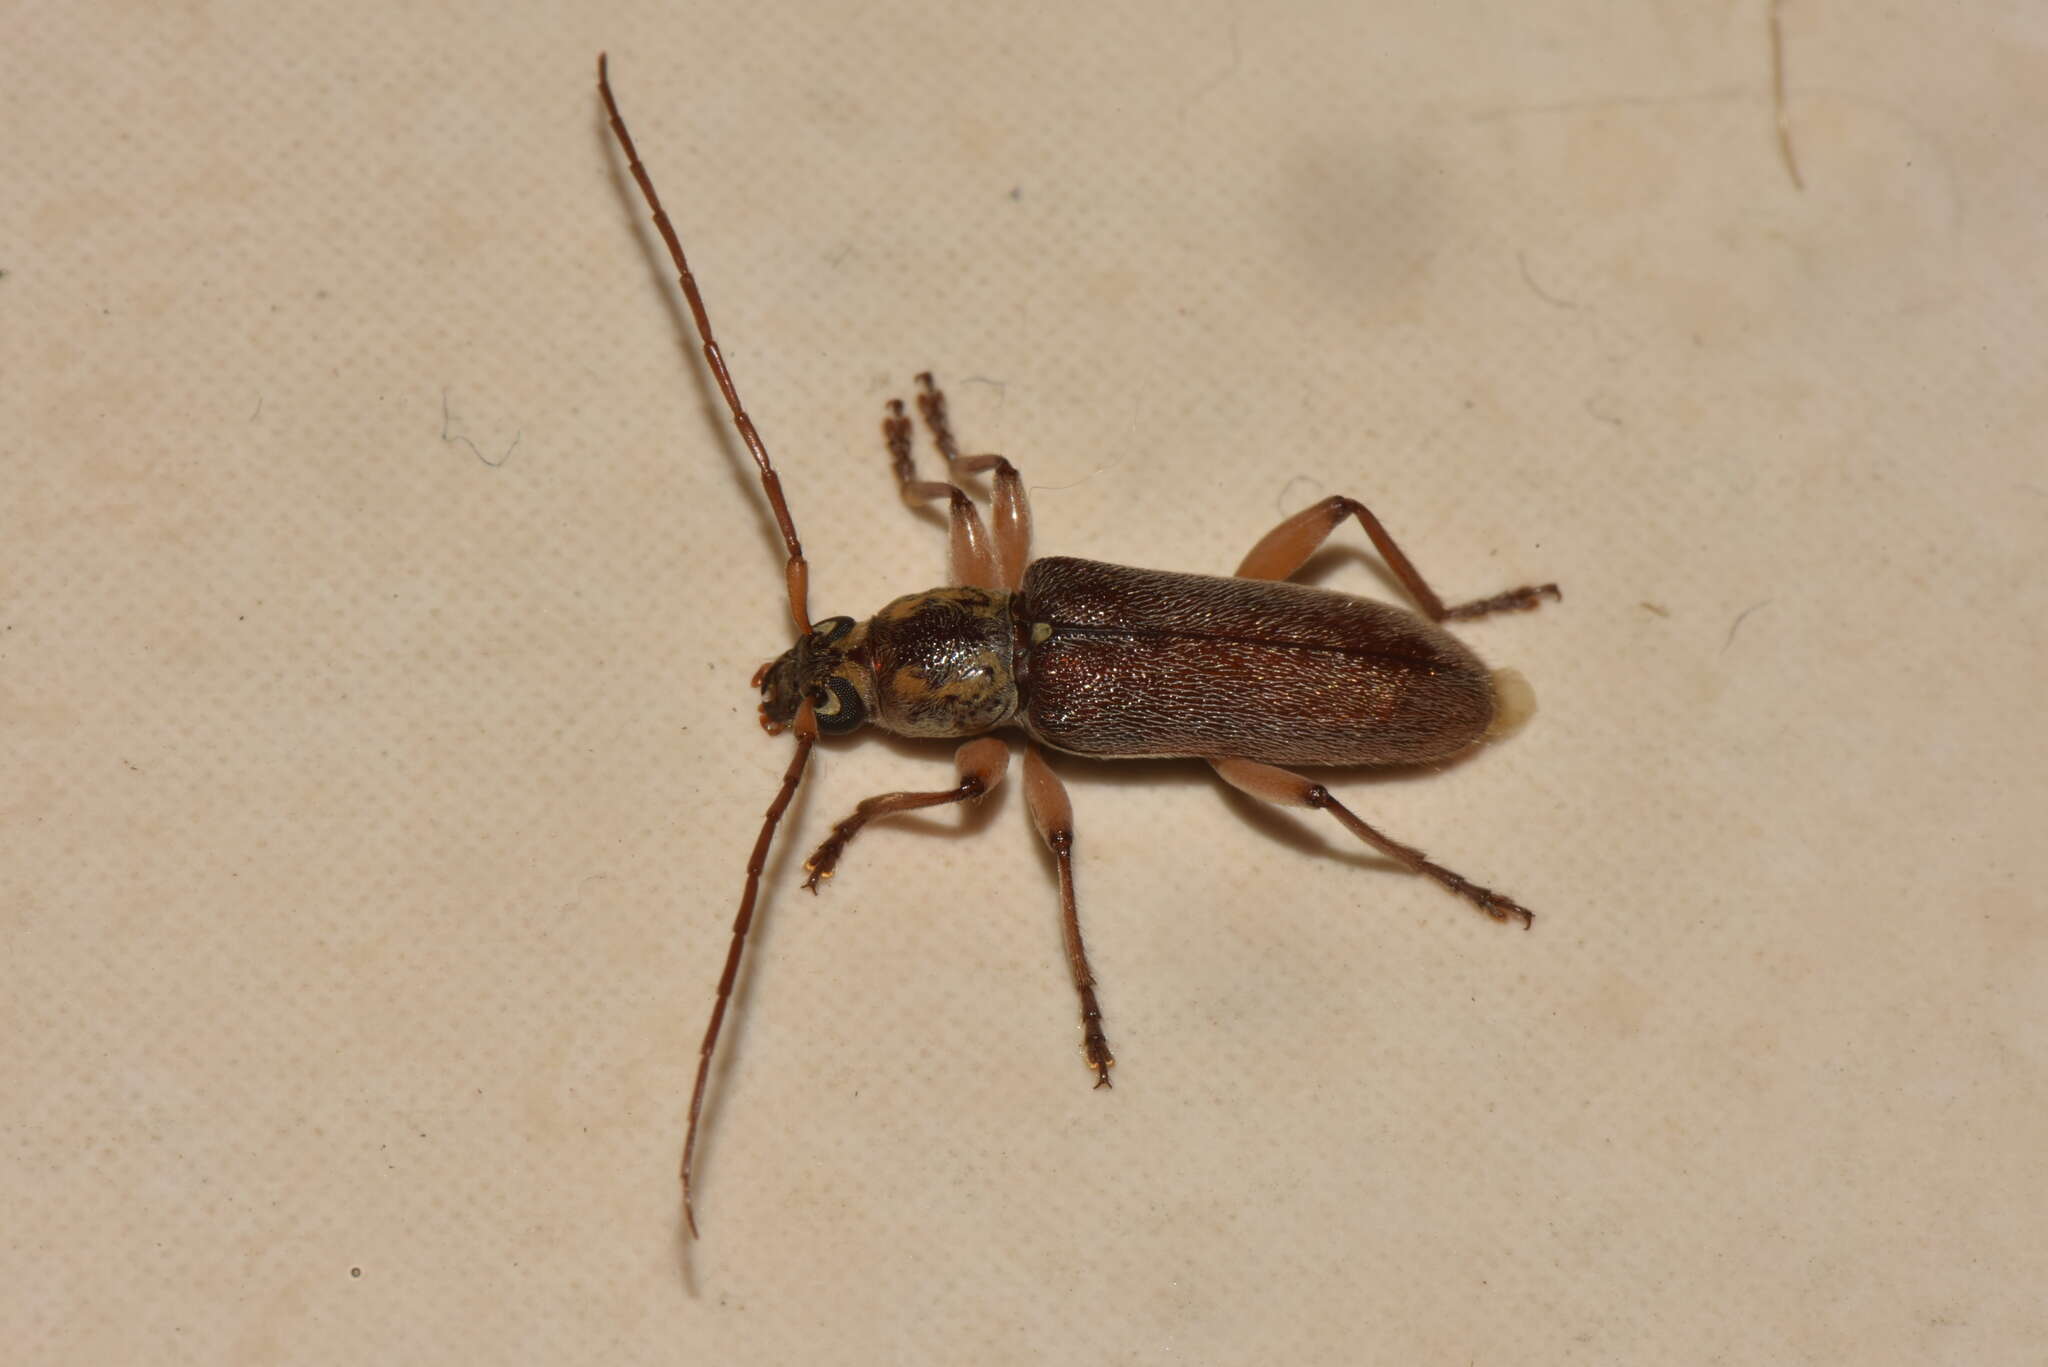 Image of Ceresium long-horned beetle